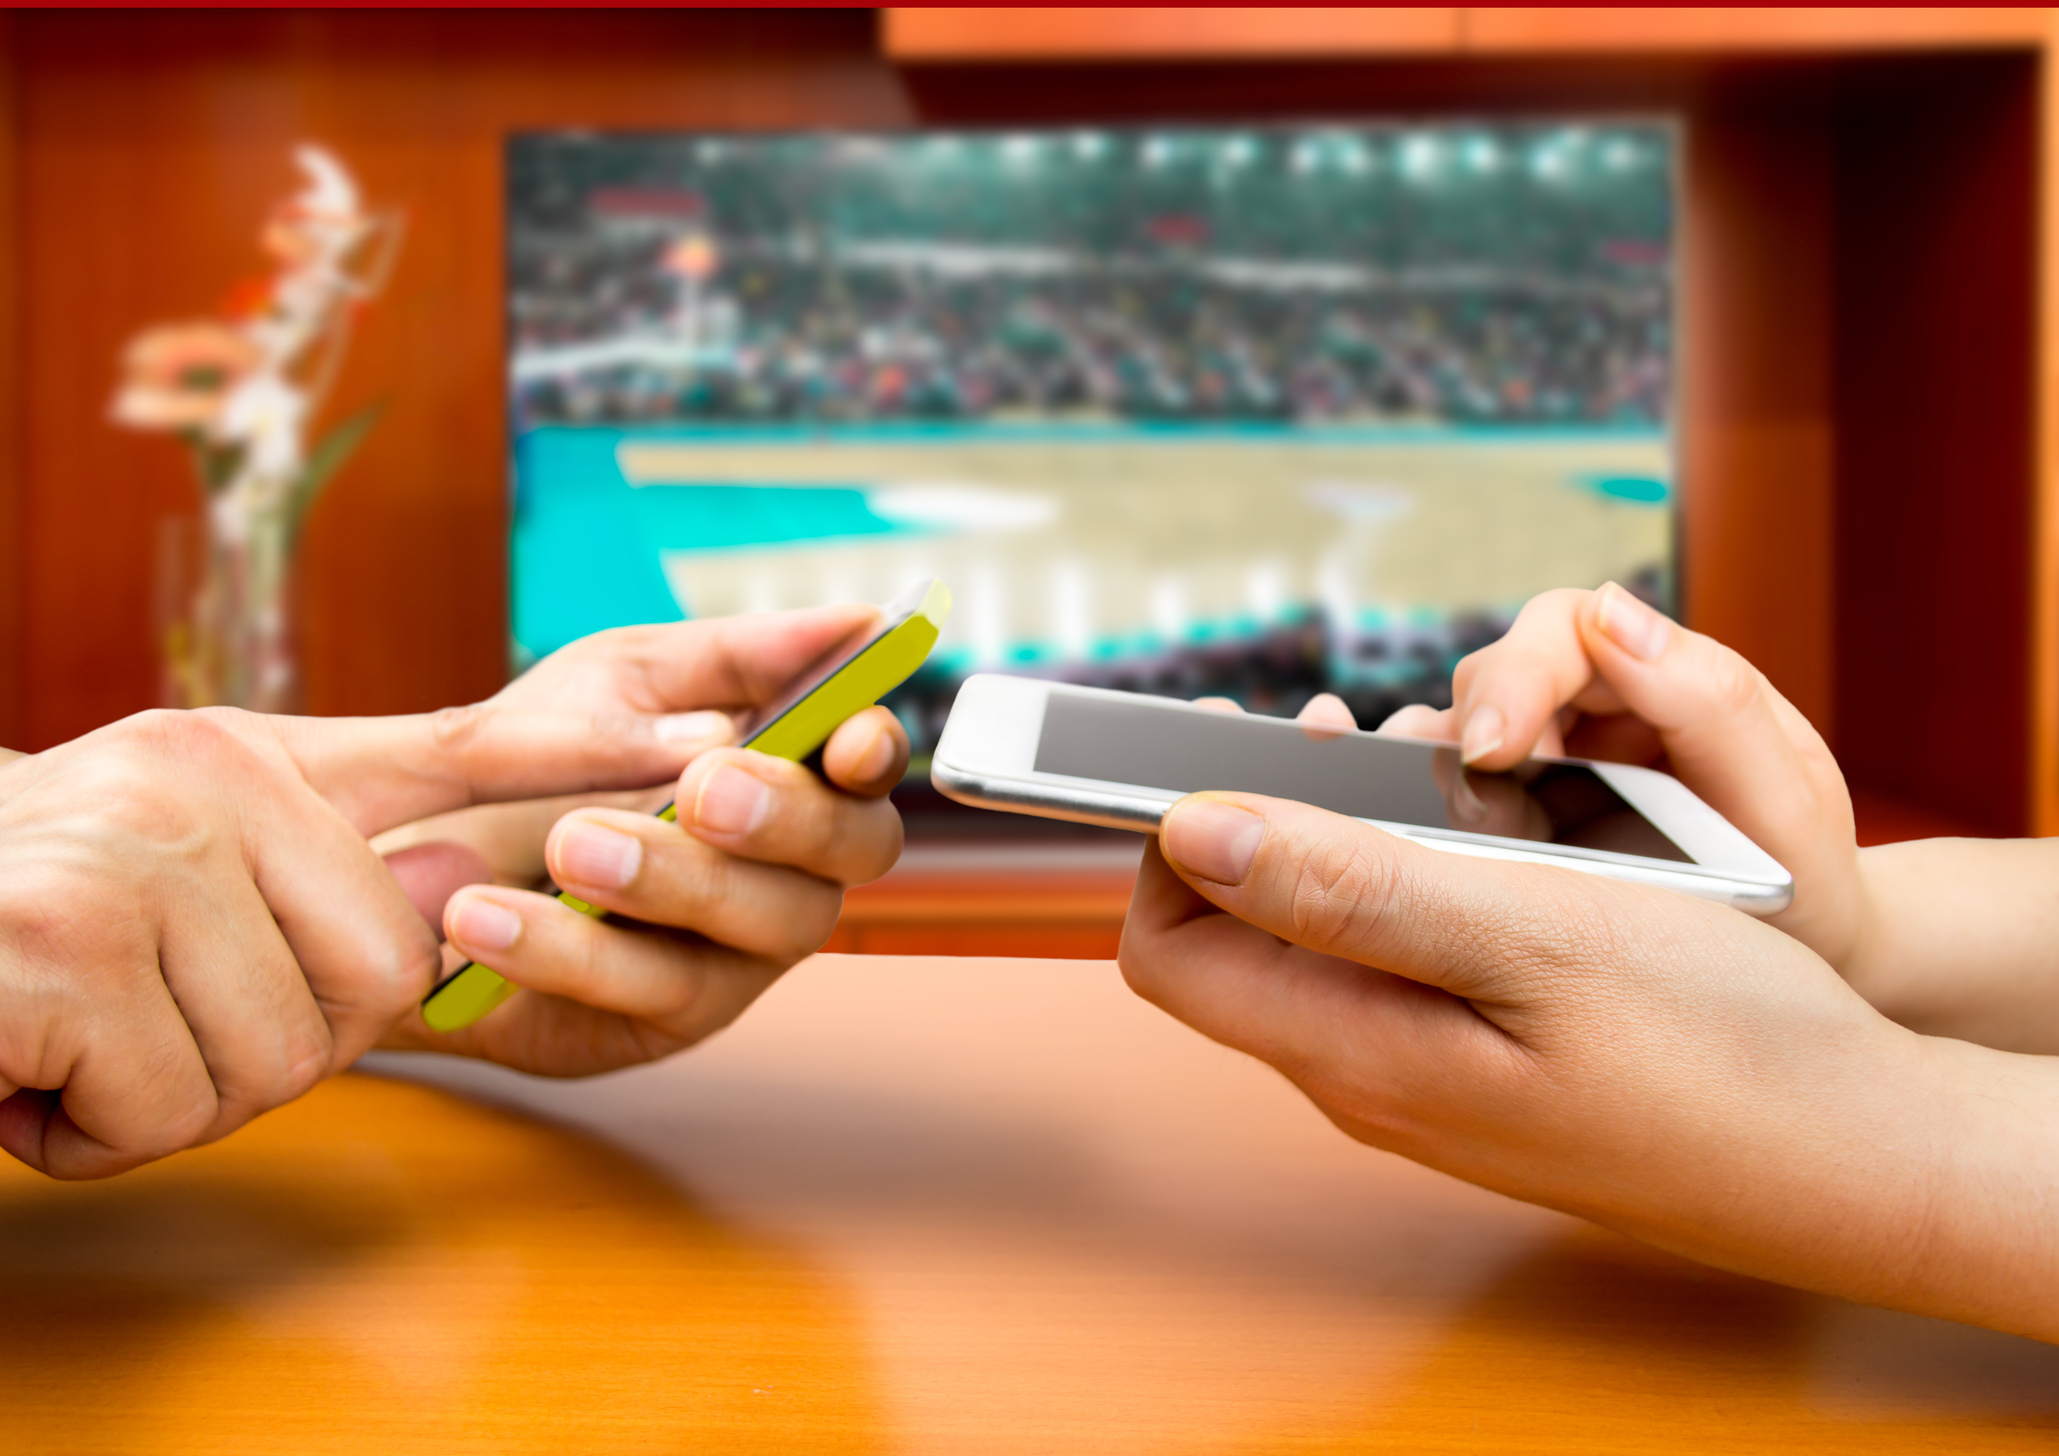 Friends using mobile phone and betting during a basketball match.With a tv background and an image of a basketball match